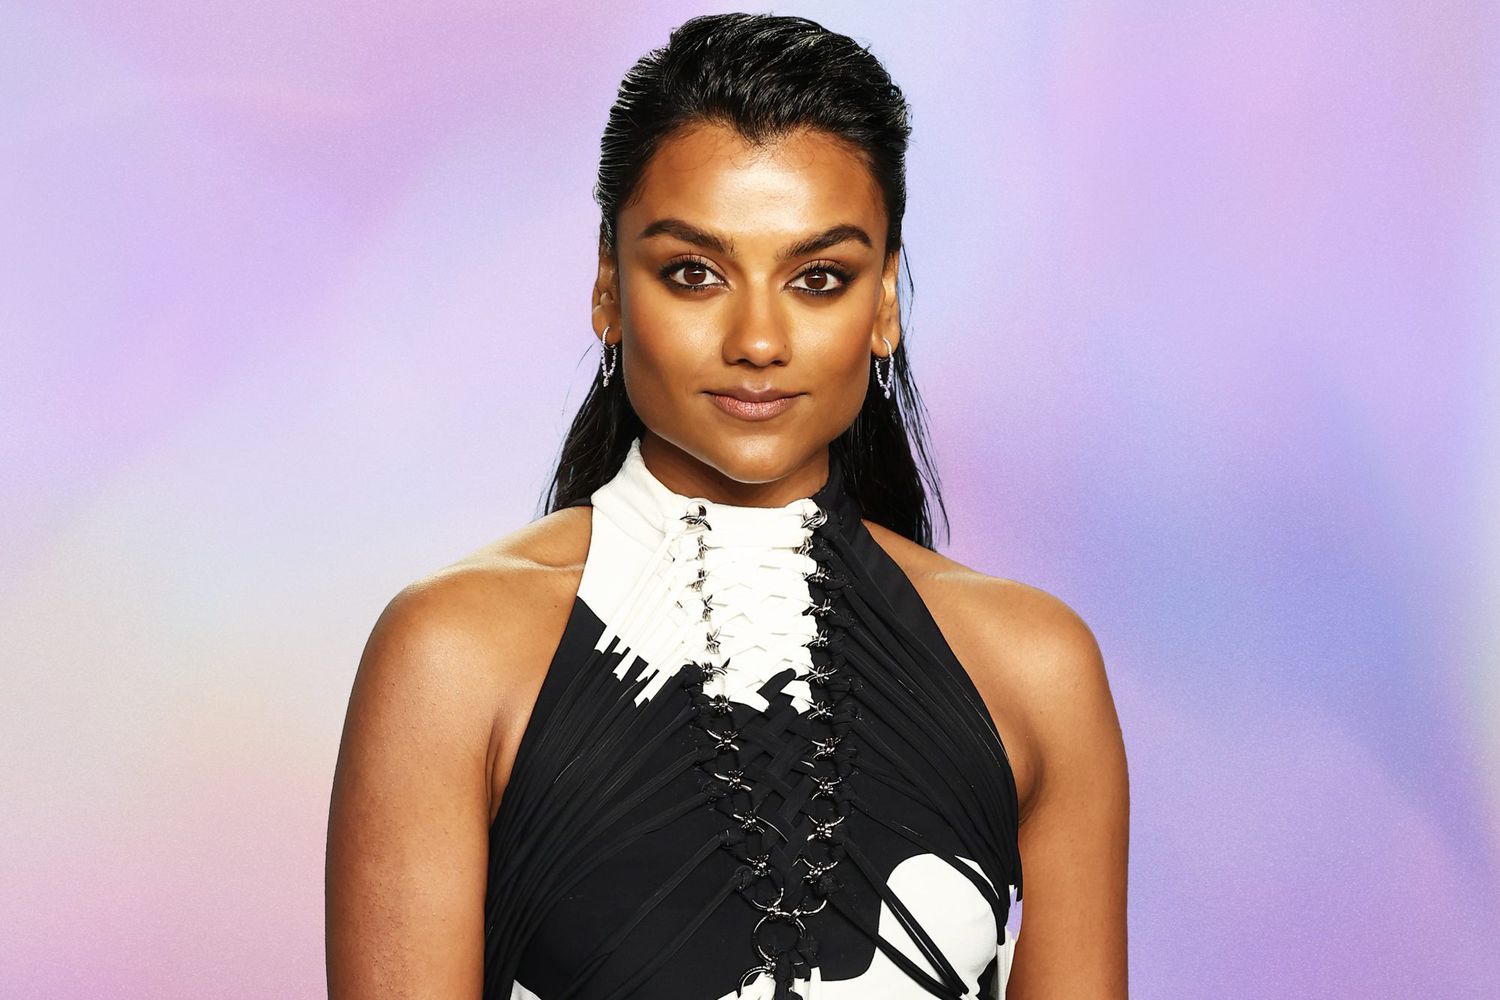 Simone Ashley attends the 2022 Vanity Fair Oscar Party hosted by Radhika Jones at Wallis Annenberg Center for the Performing Arts on March 27, 2022 in Beverly Hills, California.